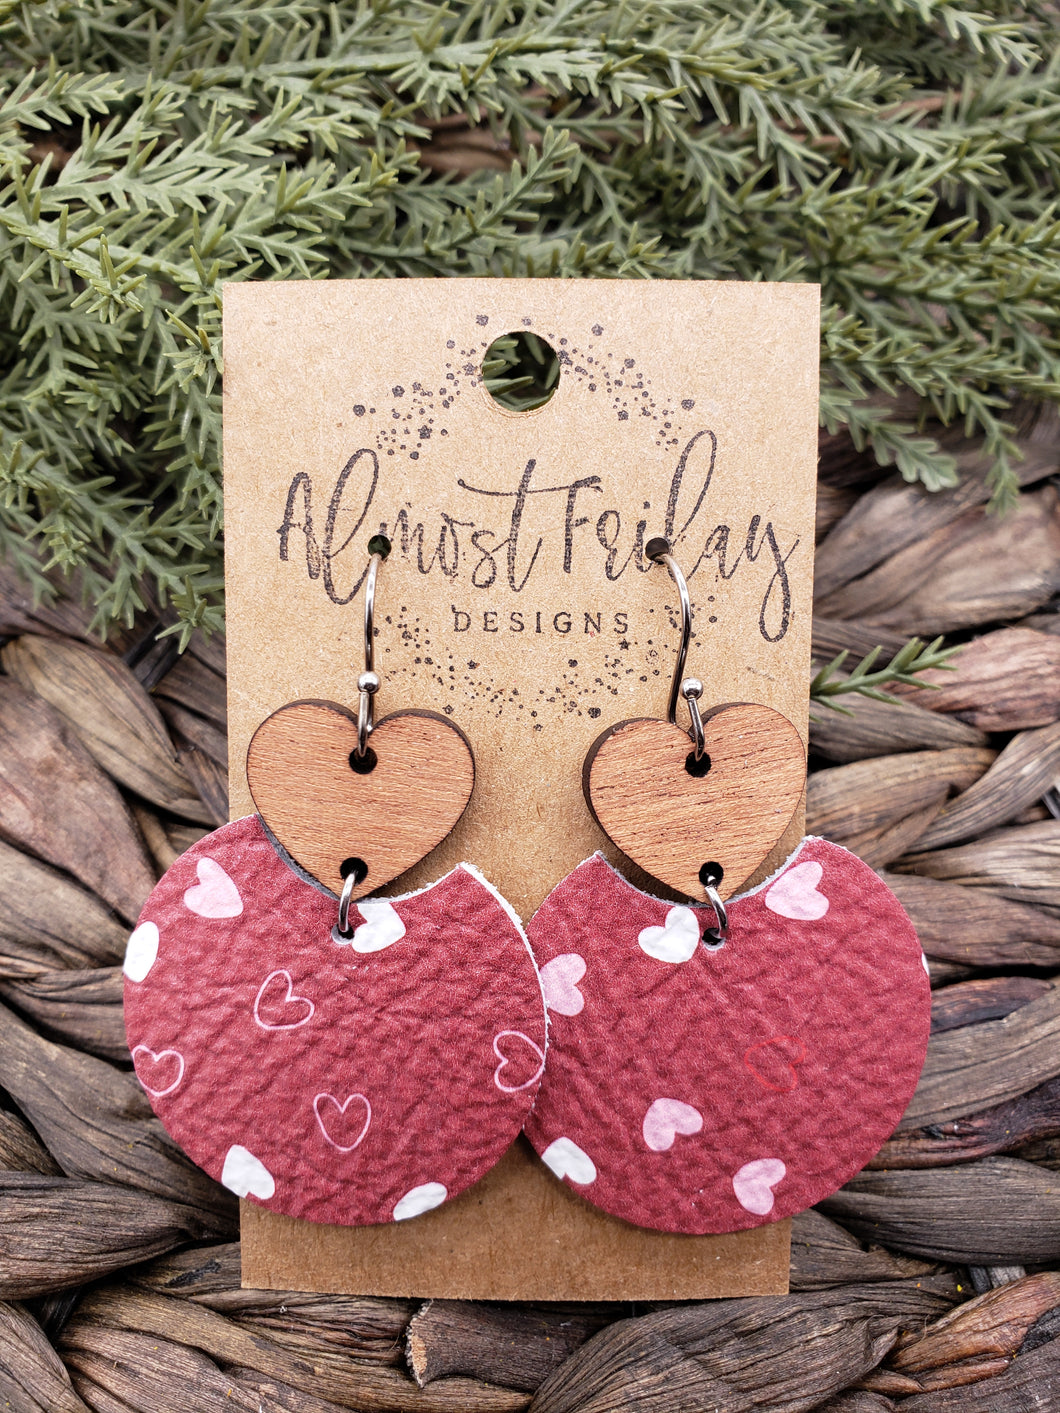 Genuine Leather Earrings - Circle - Valentine's Day - Red - Pink - White -Hearts - Wood - Statement Earrings - Textured Leather